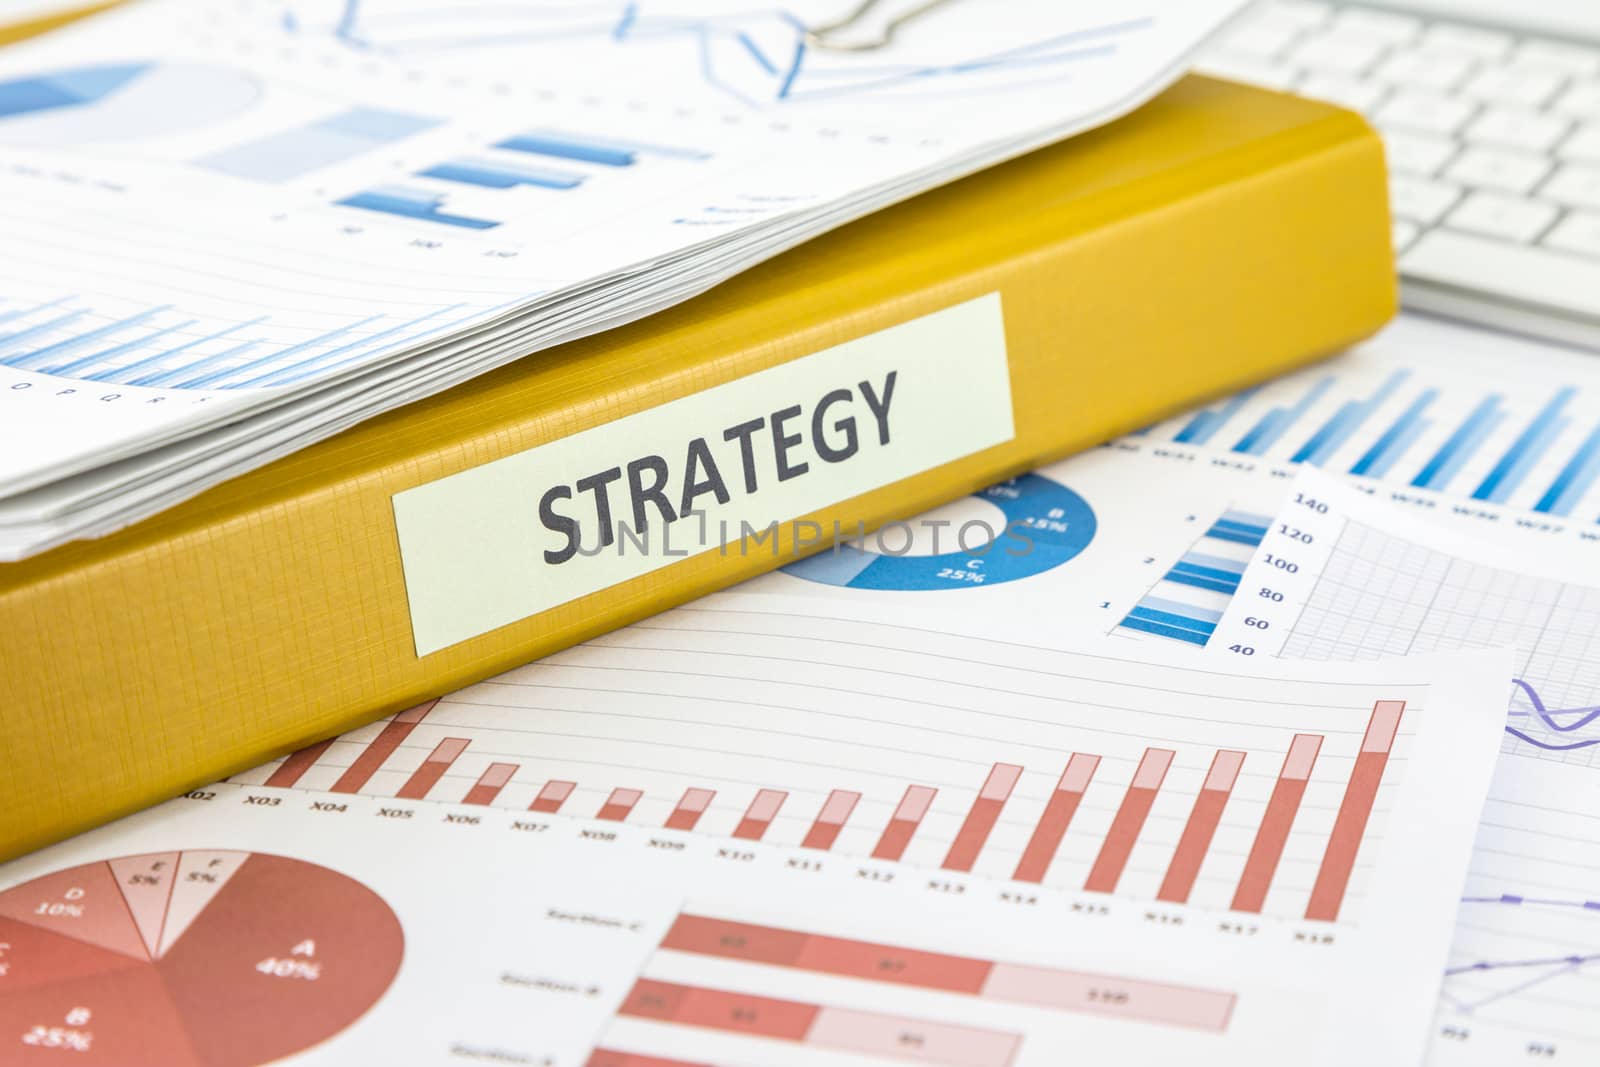 Business plan marketing strategy with graph analysis  by vinnstock